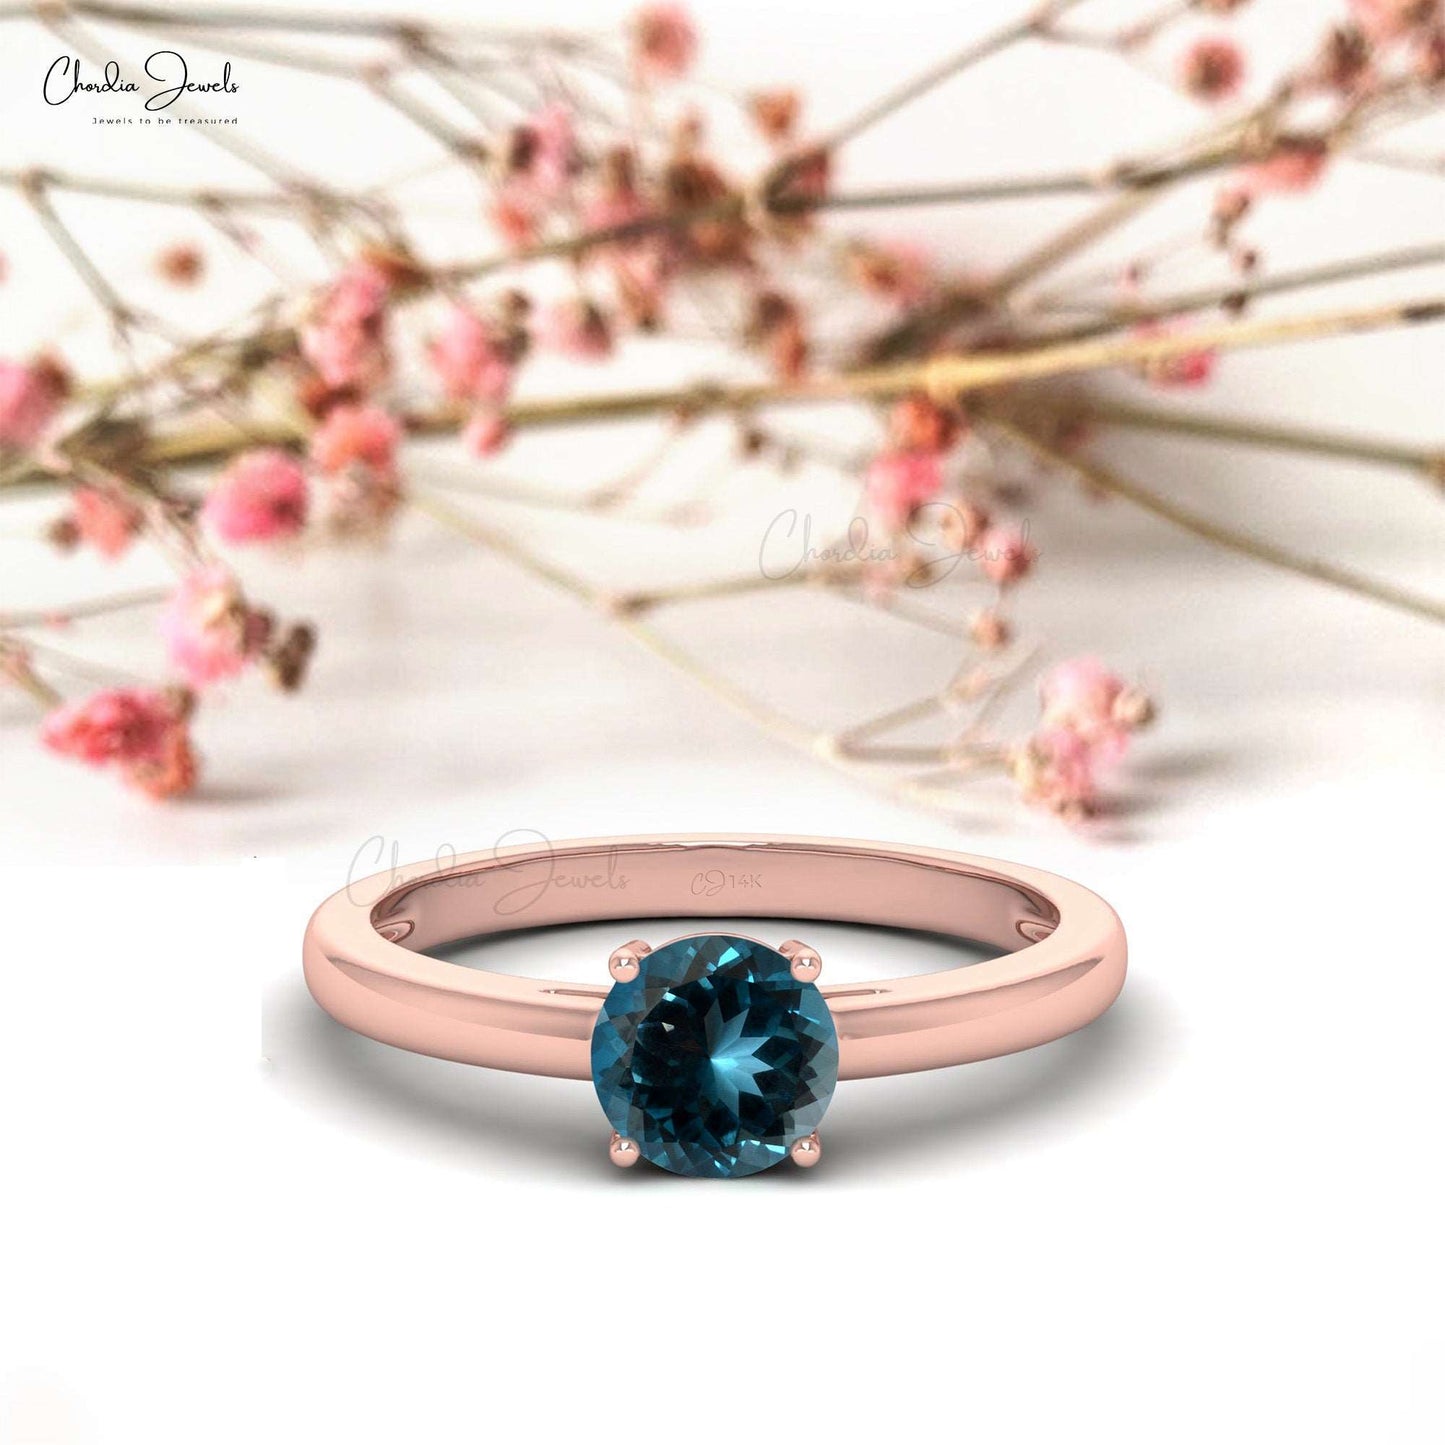 14k Solid Gold Natural Gemstone Solitaire Ring For Valentine, 0.57 Carats London Blue Topaz December Birthstone Dainty Ring For Women